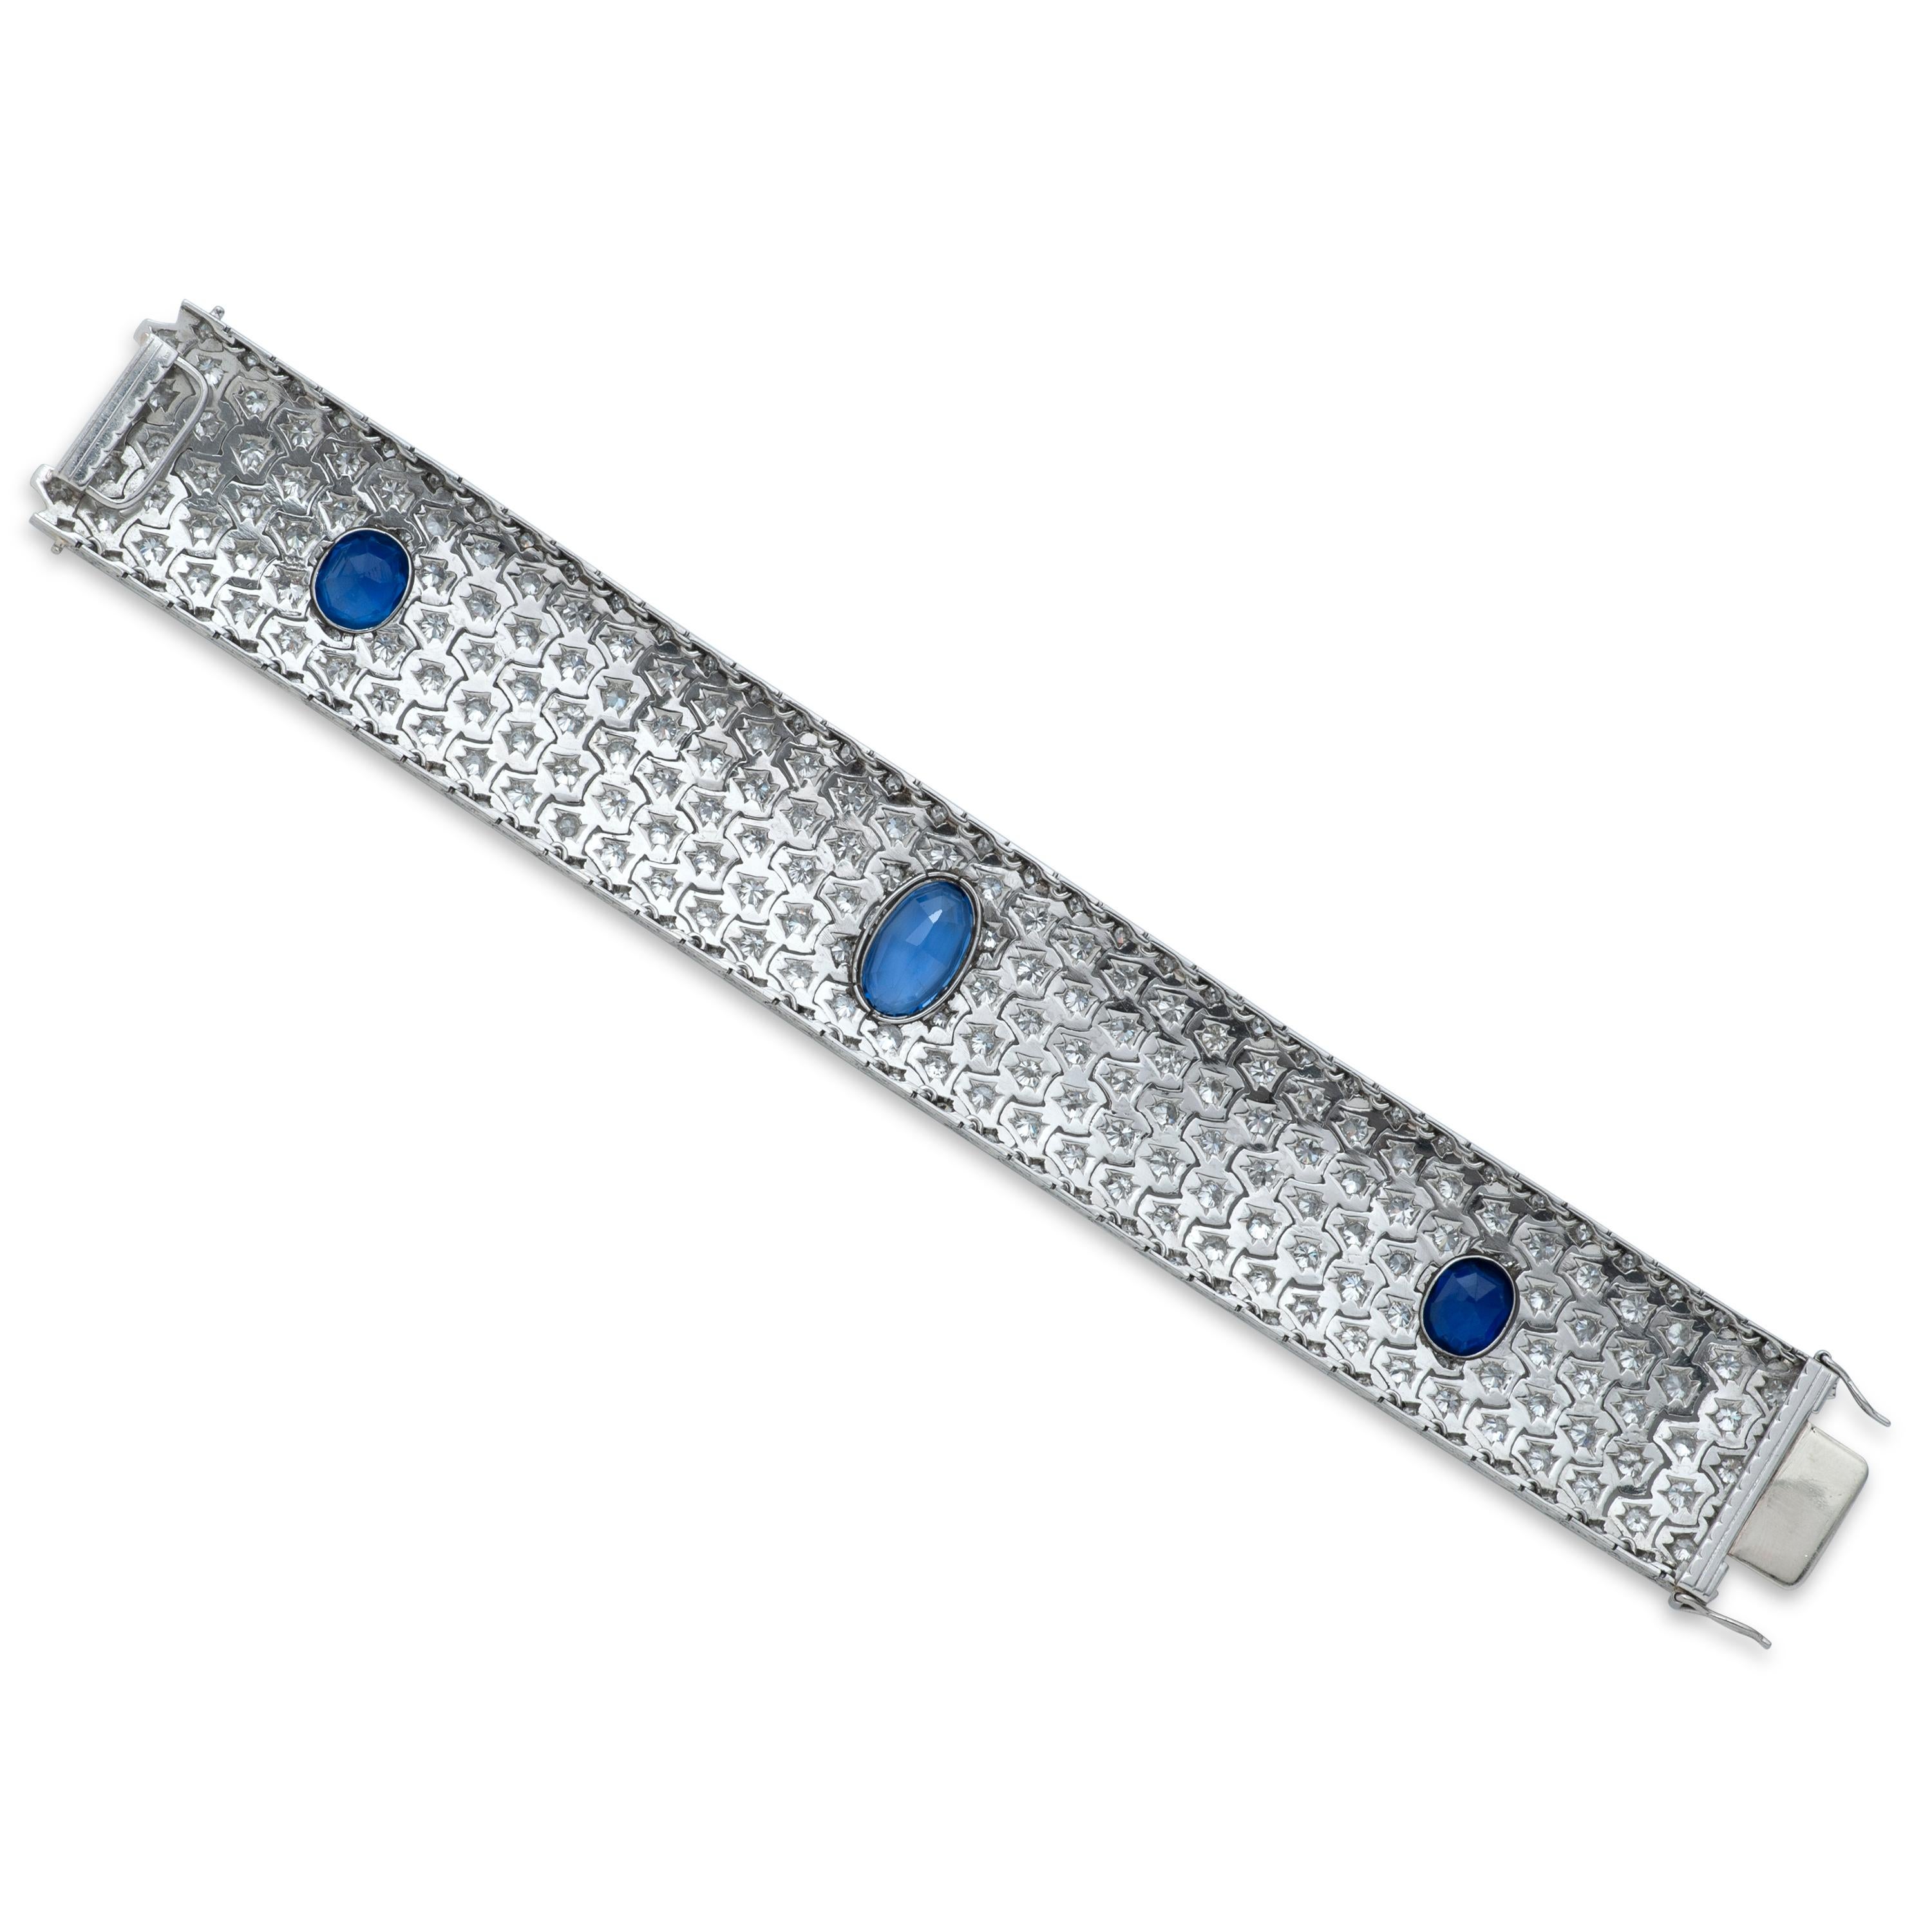 Art Deco platinum sapphire and diamond bracelet with French hallmarks.  
This bracelet contains 3 unheated Burma sapphires totaling approximately 12.75 carats, accompanied by an AGL report.
Approximately 16.50ct of diamonds surround the bezel set